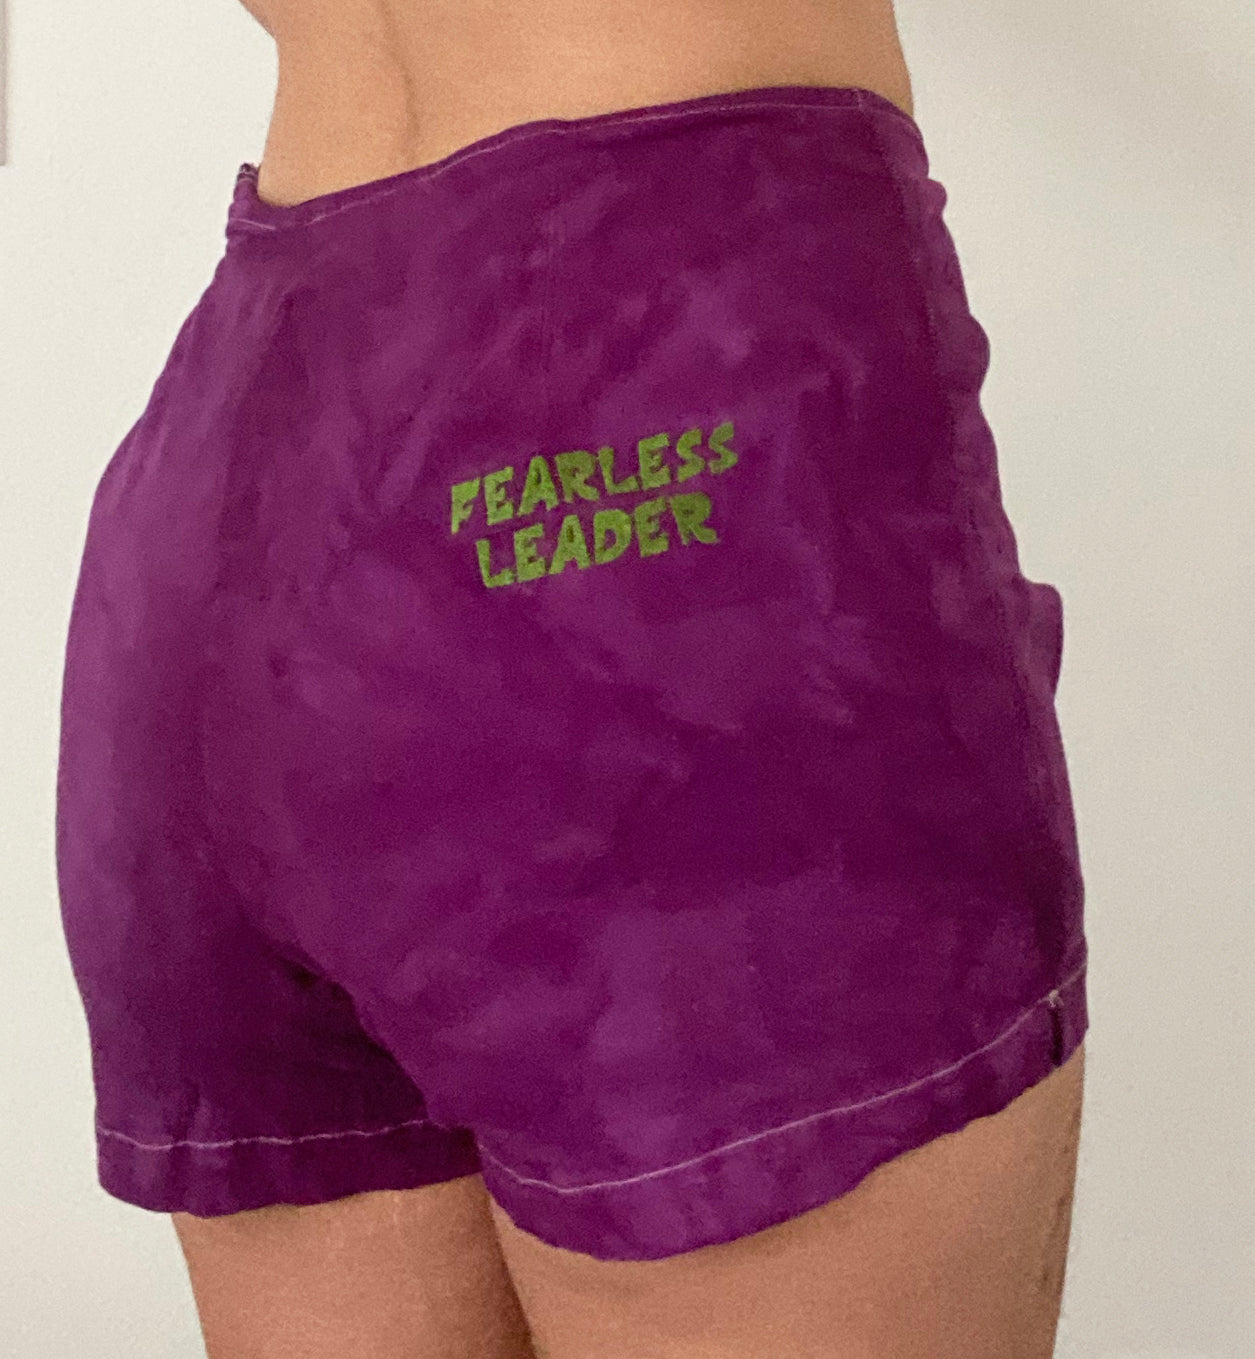 Fearless Leader Shorts